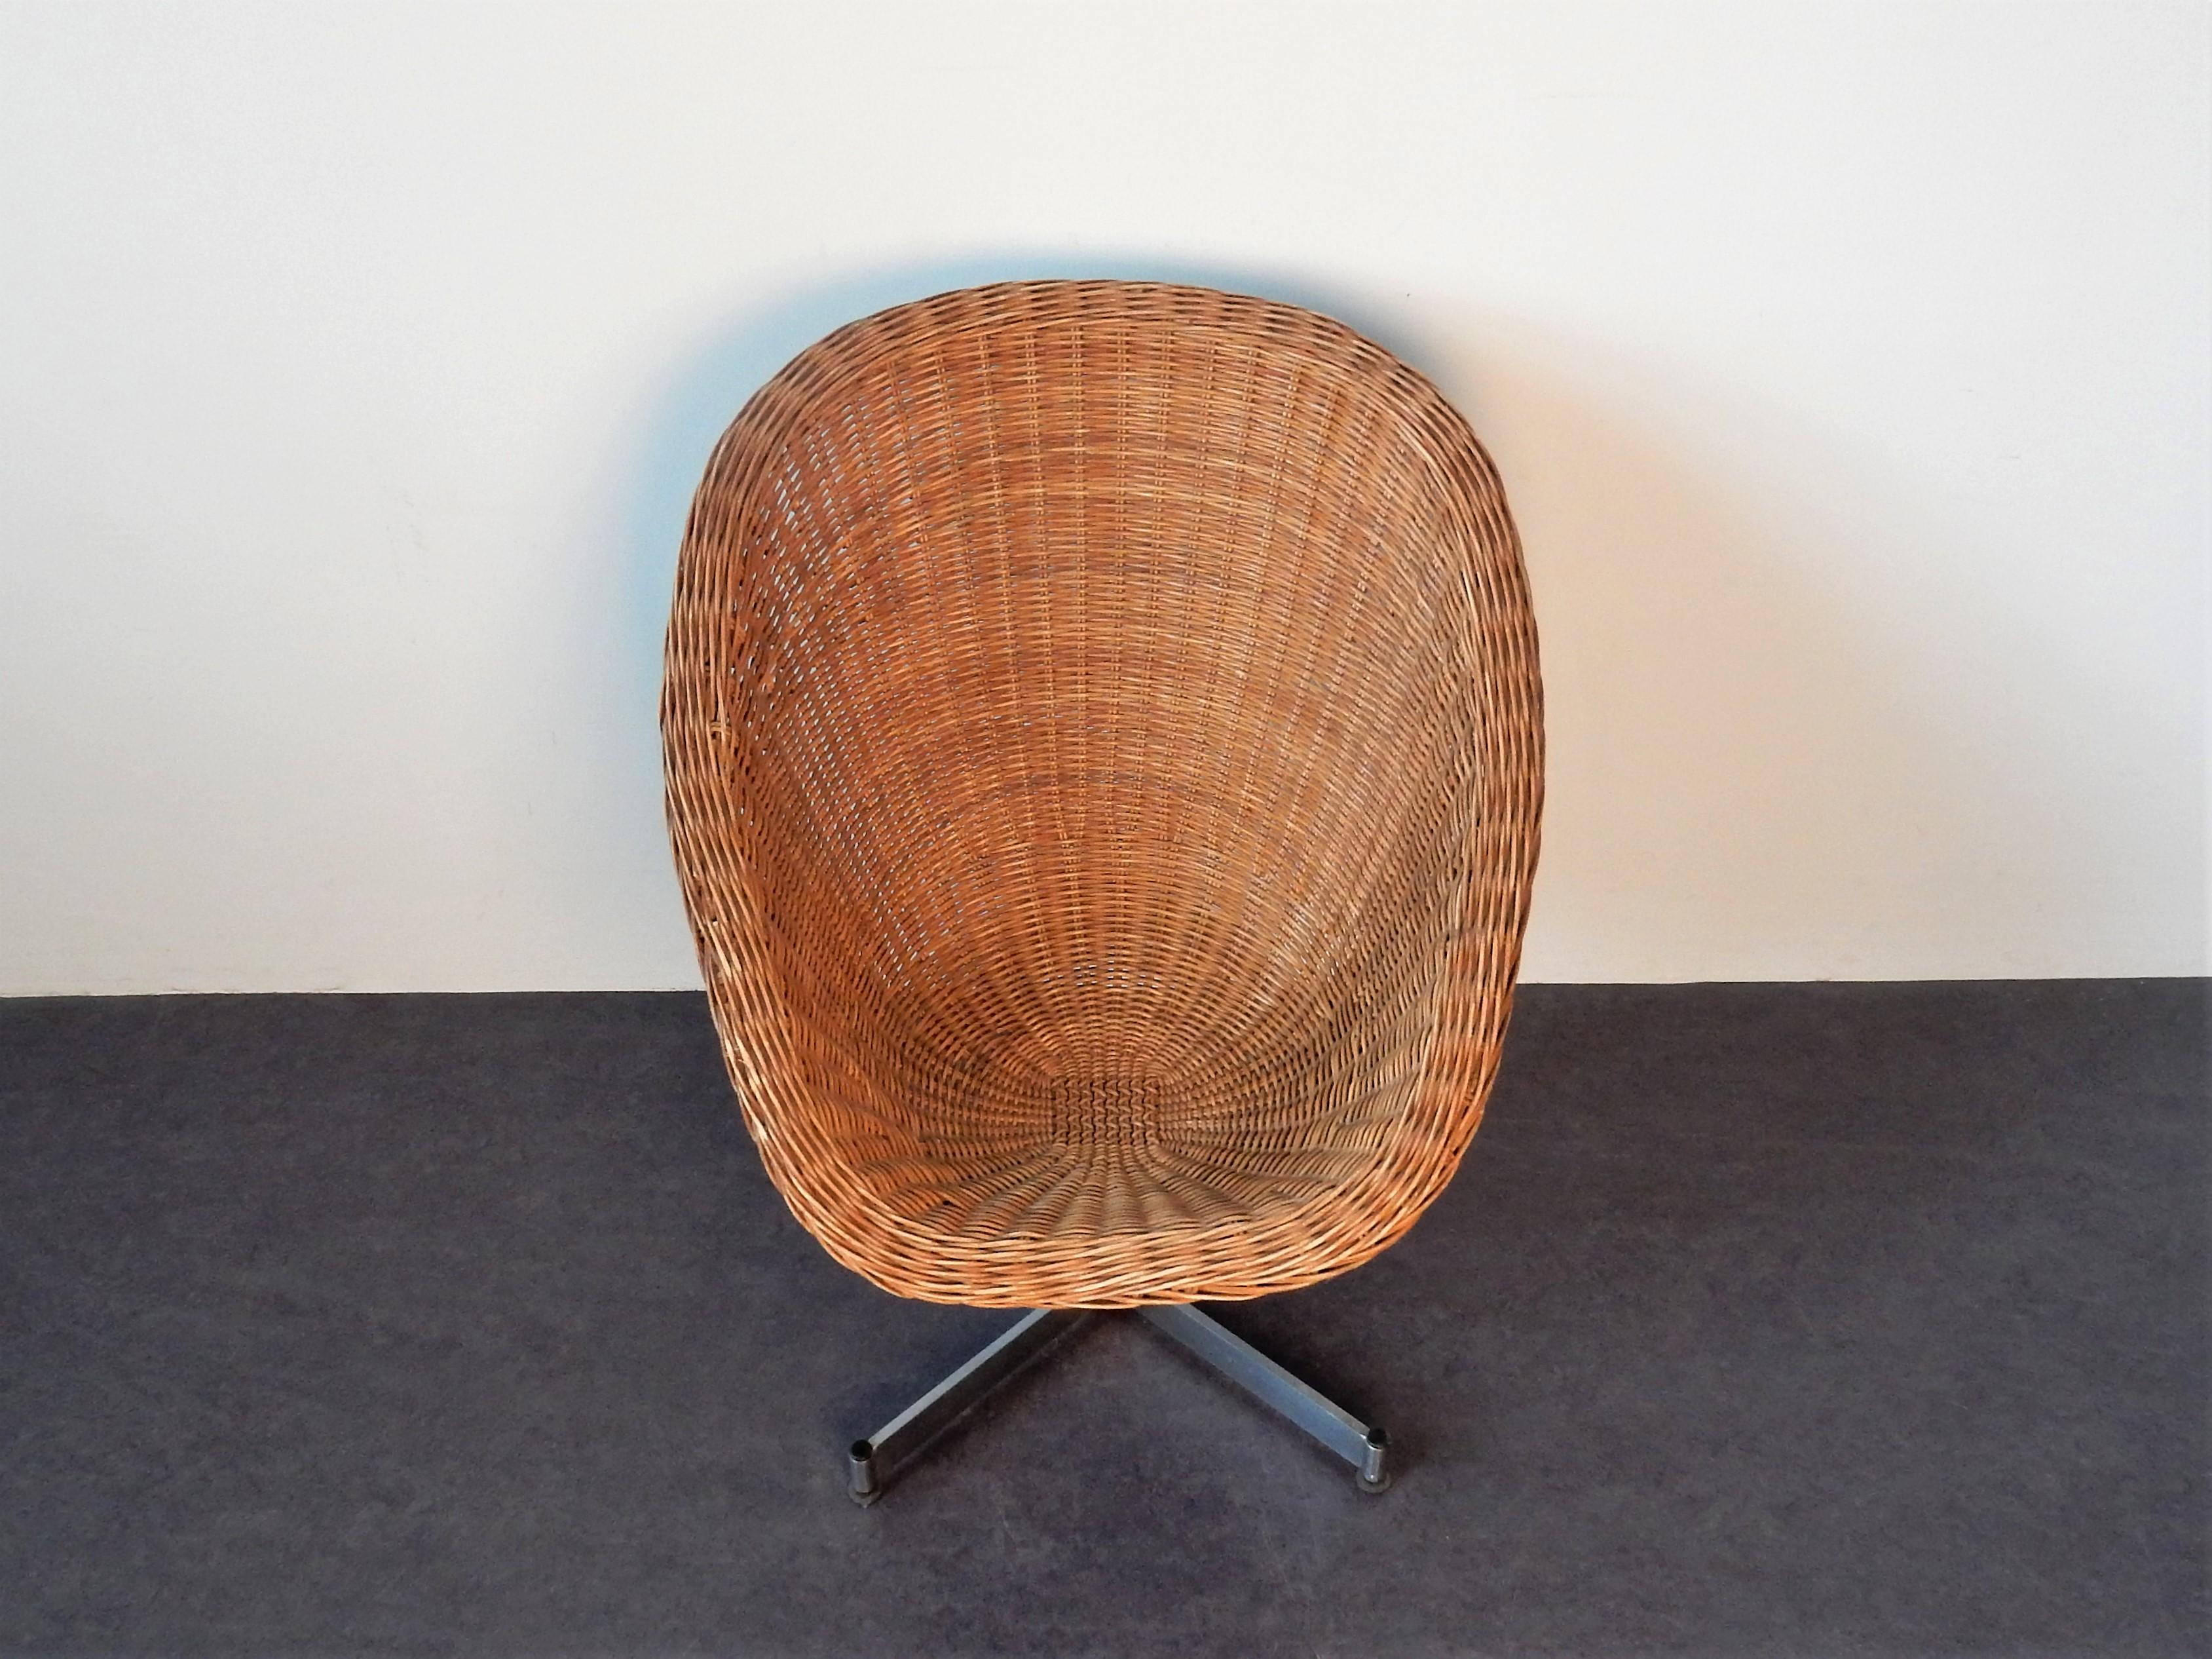 This rare rattan swivel chair was designed by Dirk van Sliedrecht for Gebroeders Jonkers. It has a chrome plated swivel base and a comfortable rattan seat. It is from the 1960s and has stood through time very well showing some signs of age and use.